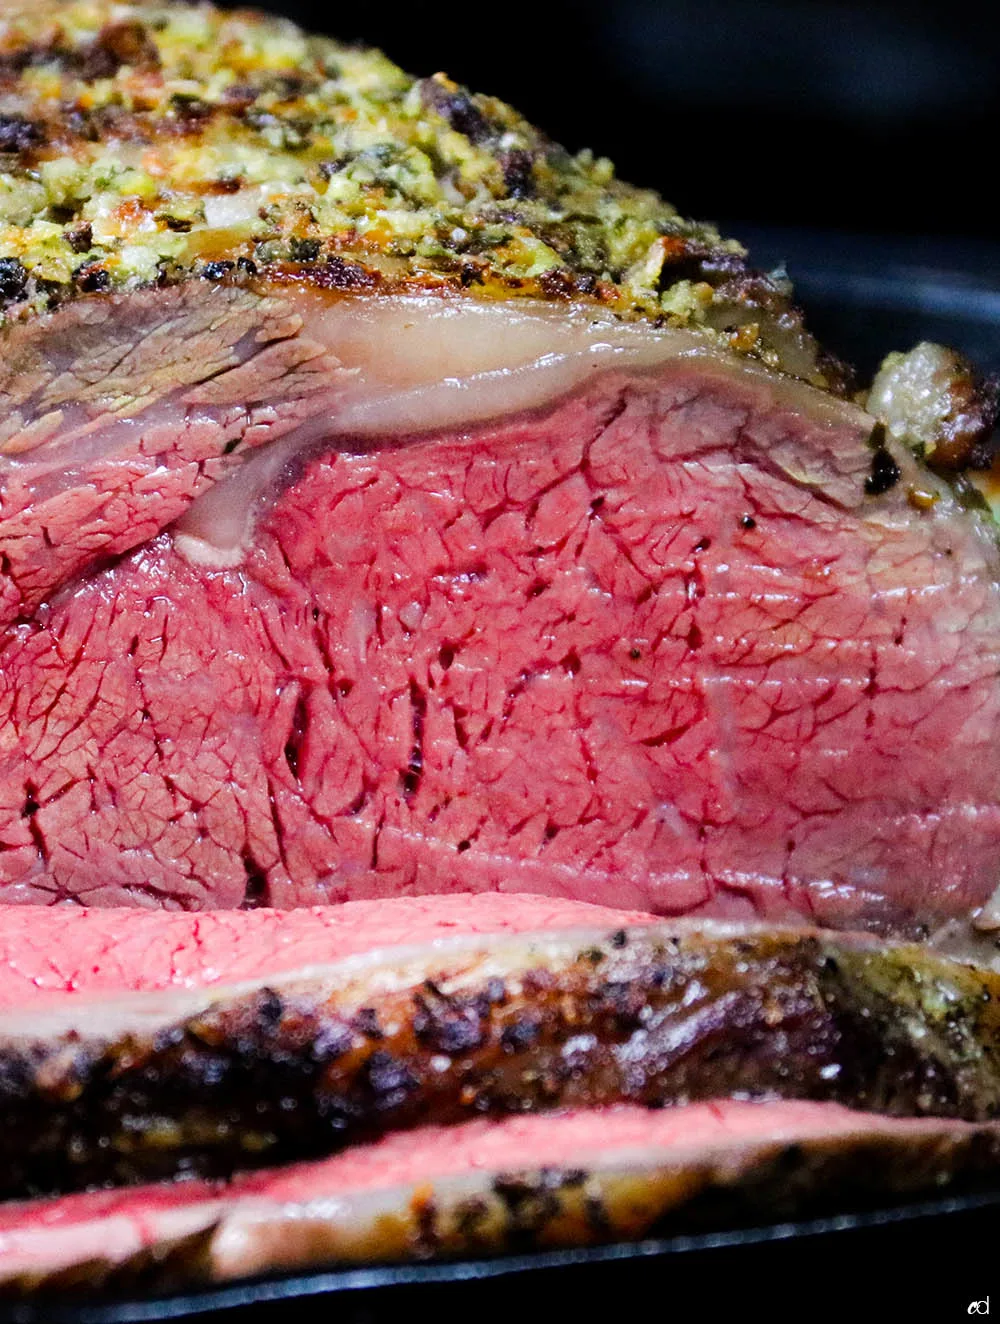 5 Tips for Doing Sous Vide Right - the CAMBRO blog